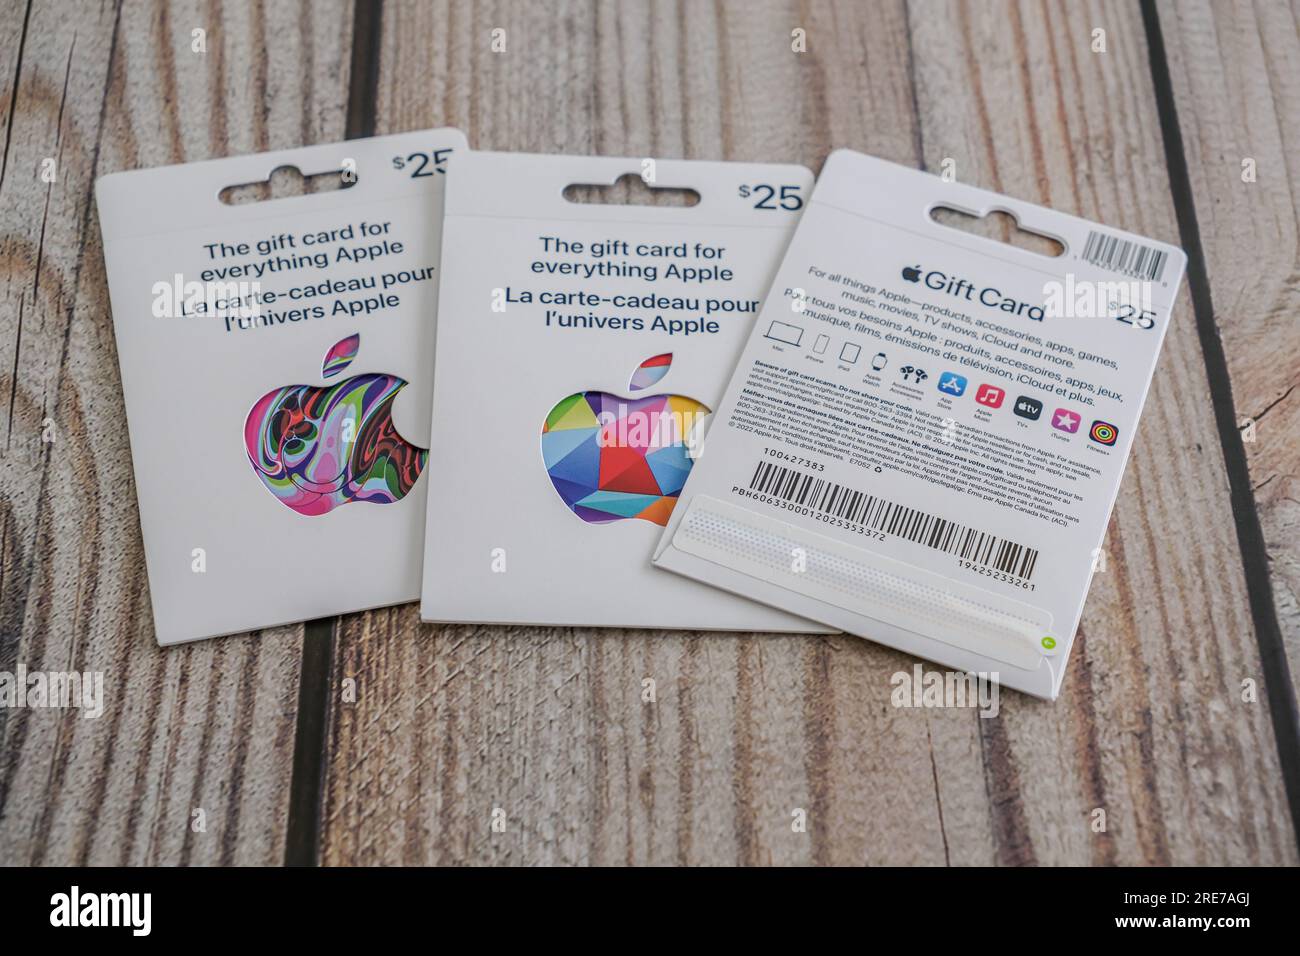 Apple's new Gift Cards work digitally and in stores in Canada